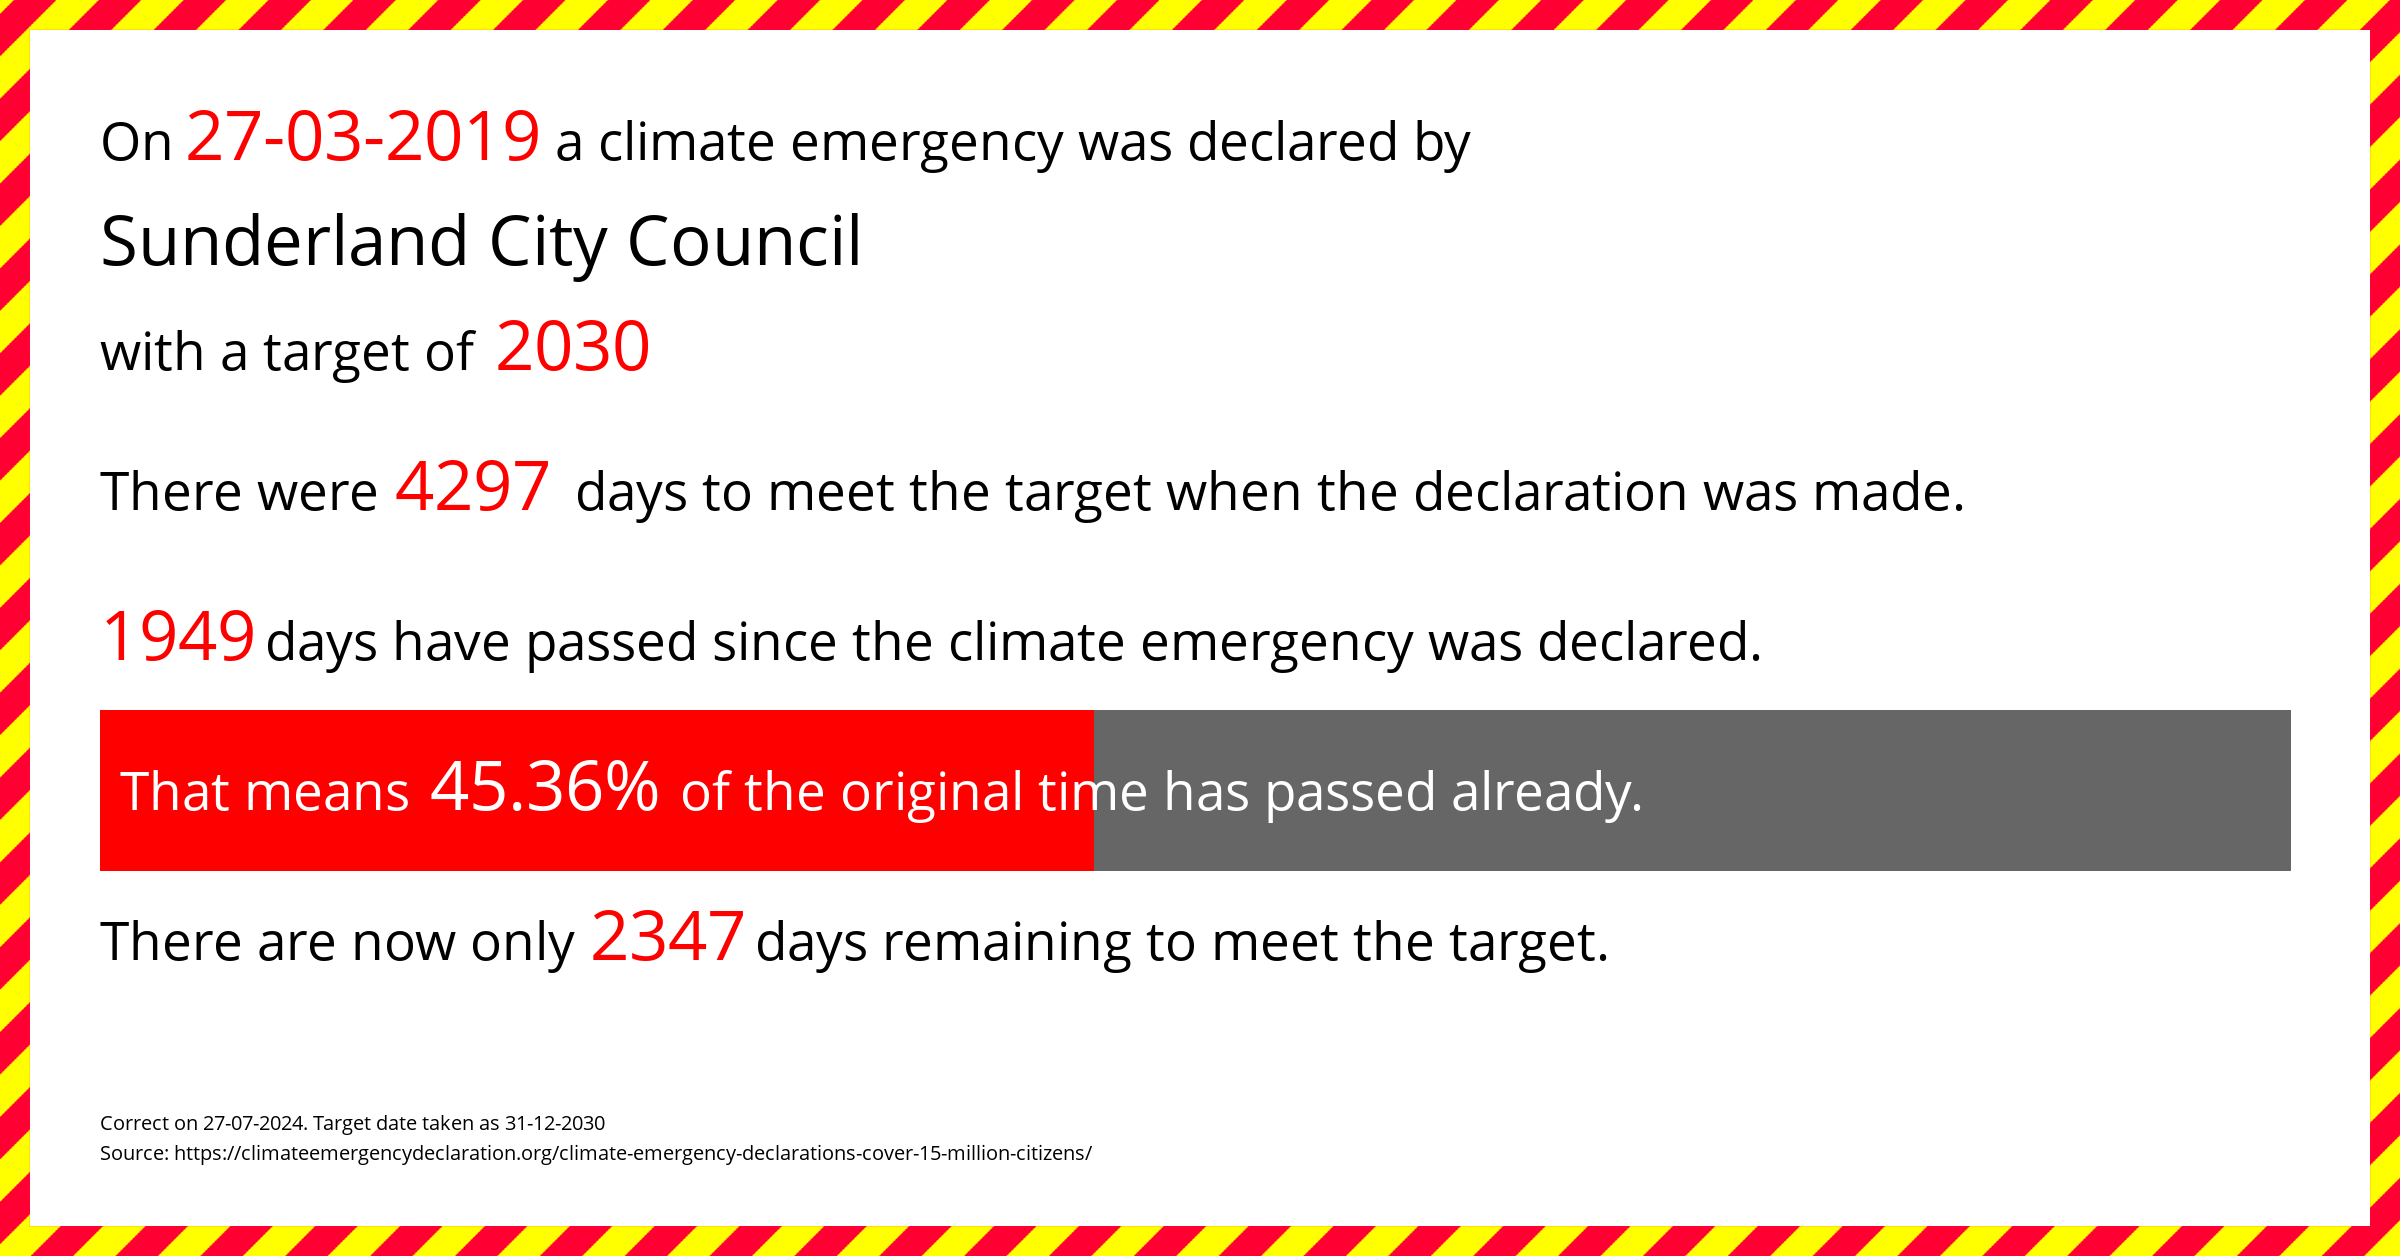 Sunderland City Council declared a Climate emergency on Wednesday 27th March 2019, with a target of 2030.